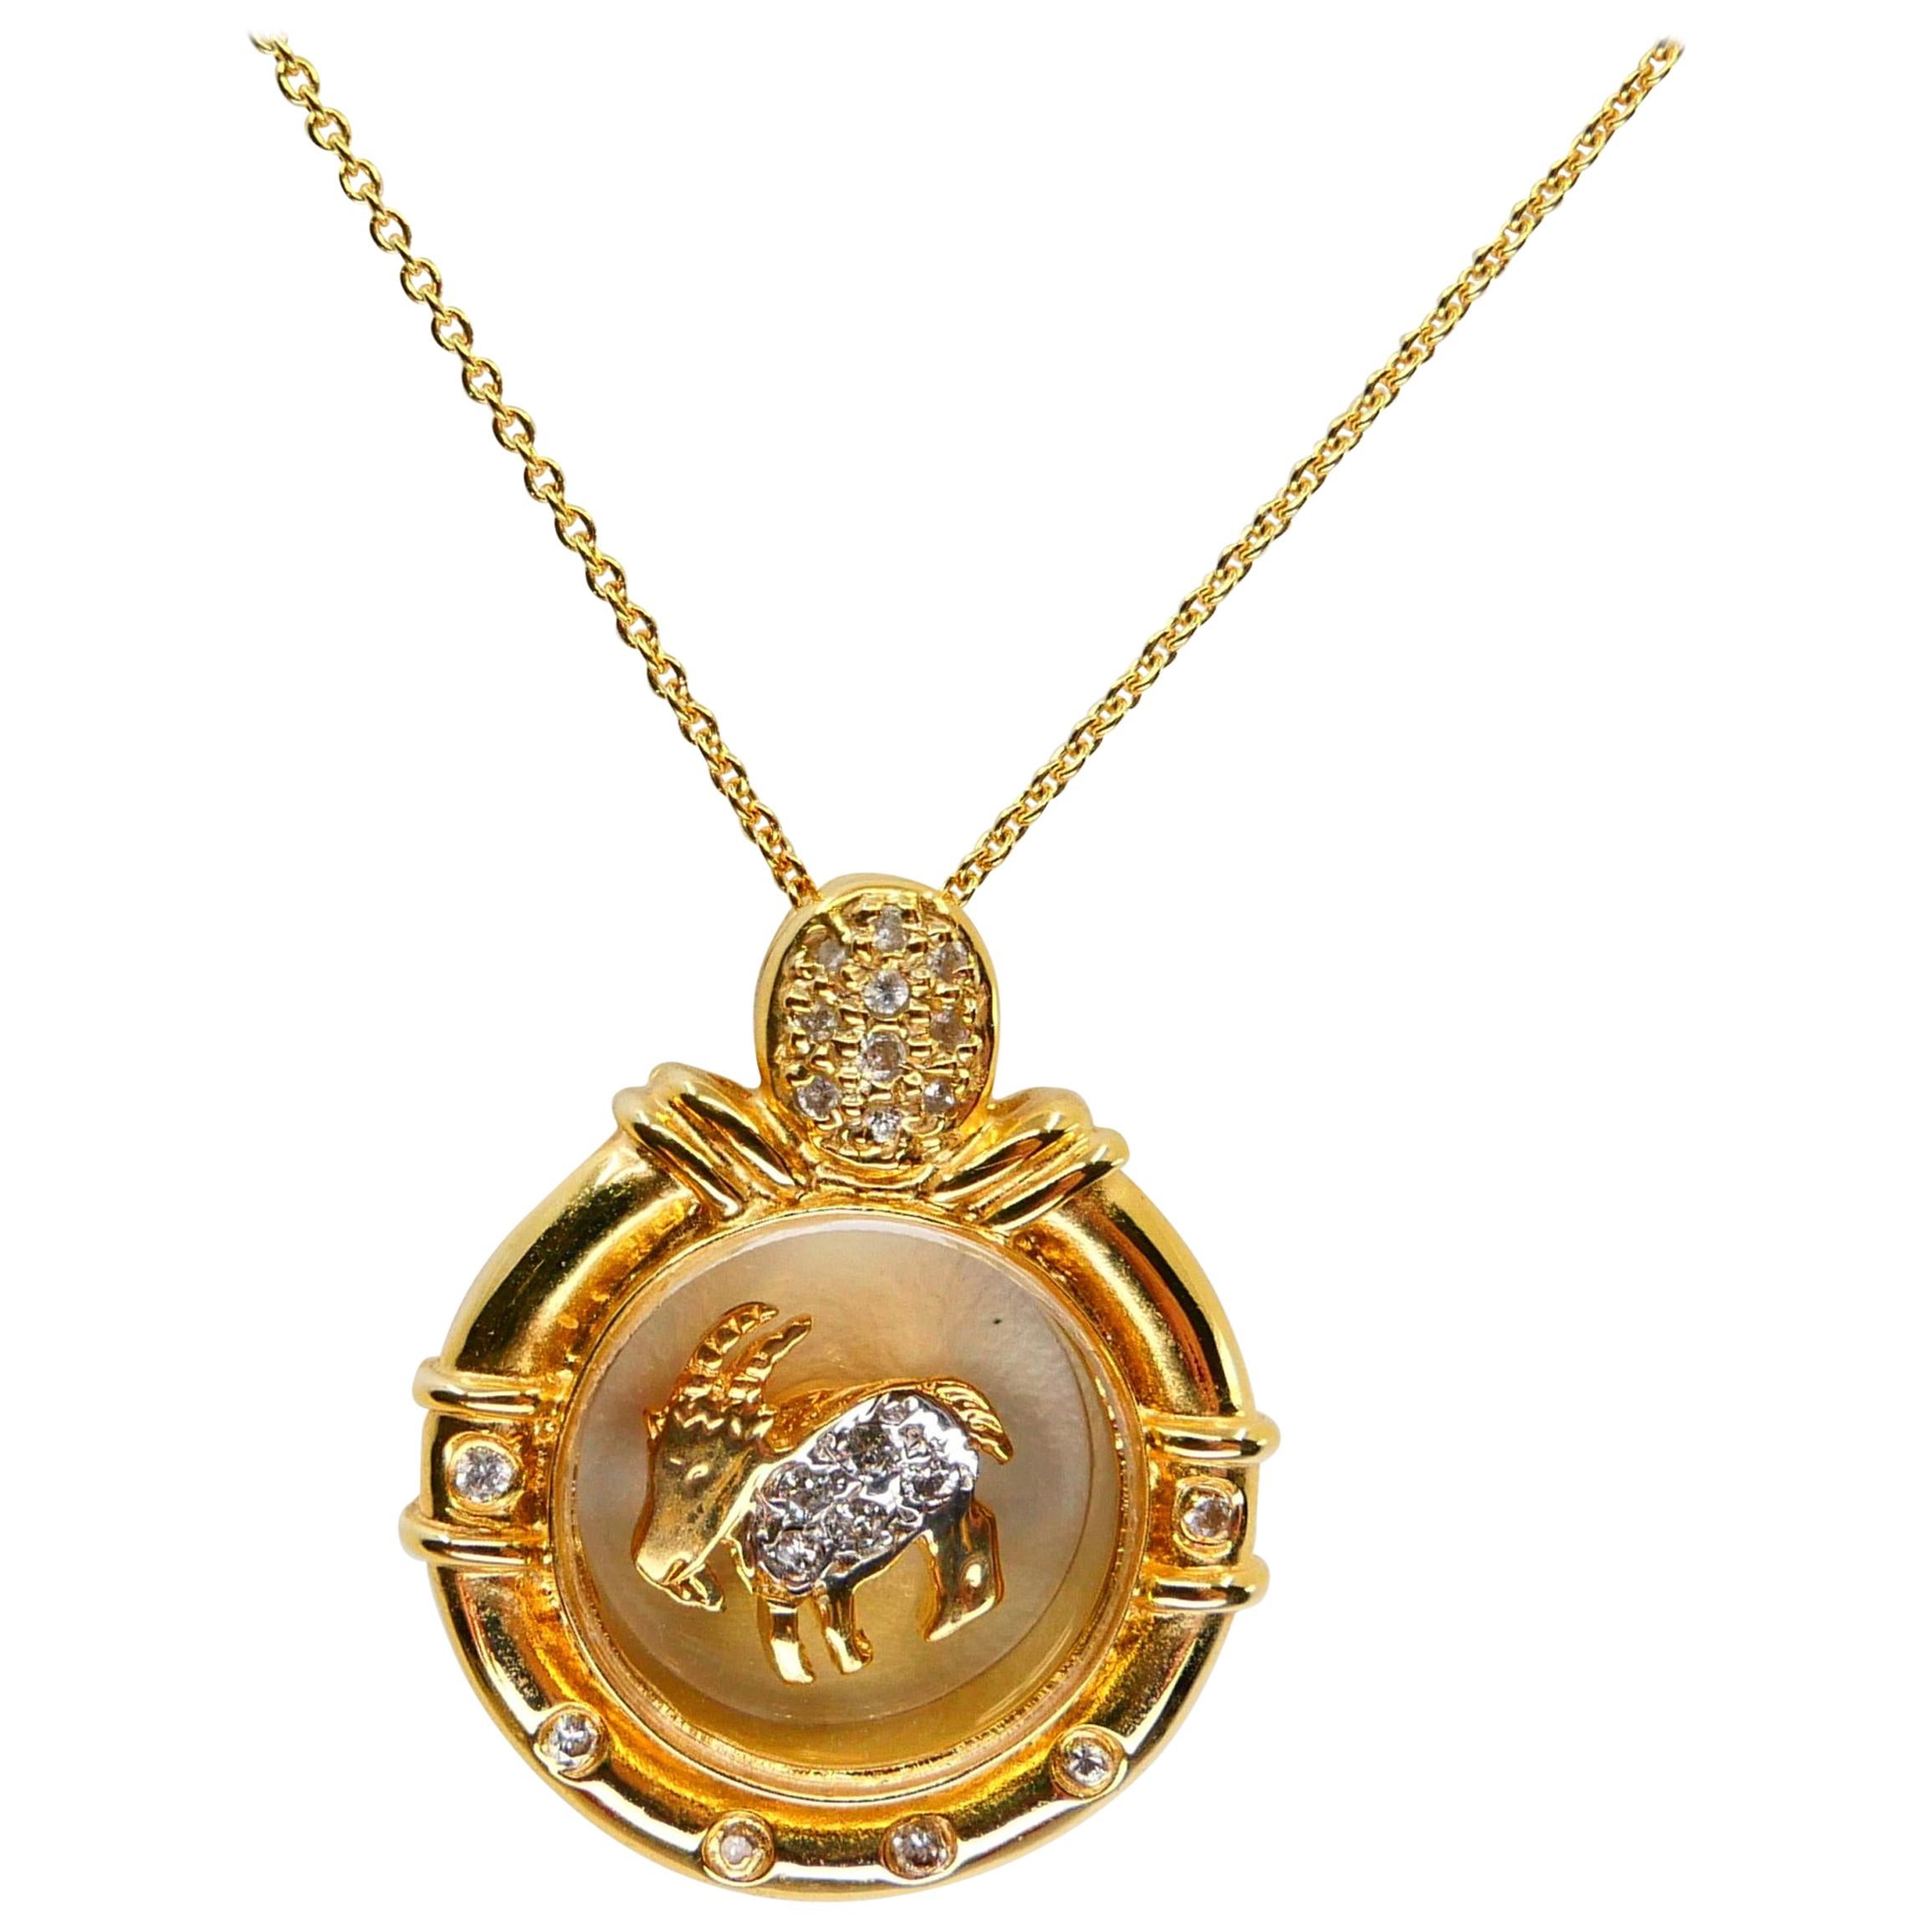 18 Karat Yellow Gold Spinning Goat Sheep Pendant. Chinese Zodiac Of The Sheep. For Sale